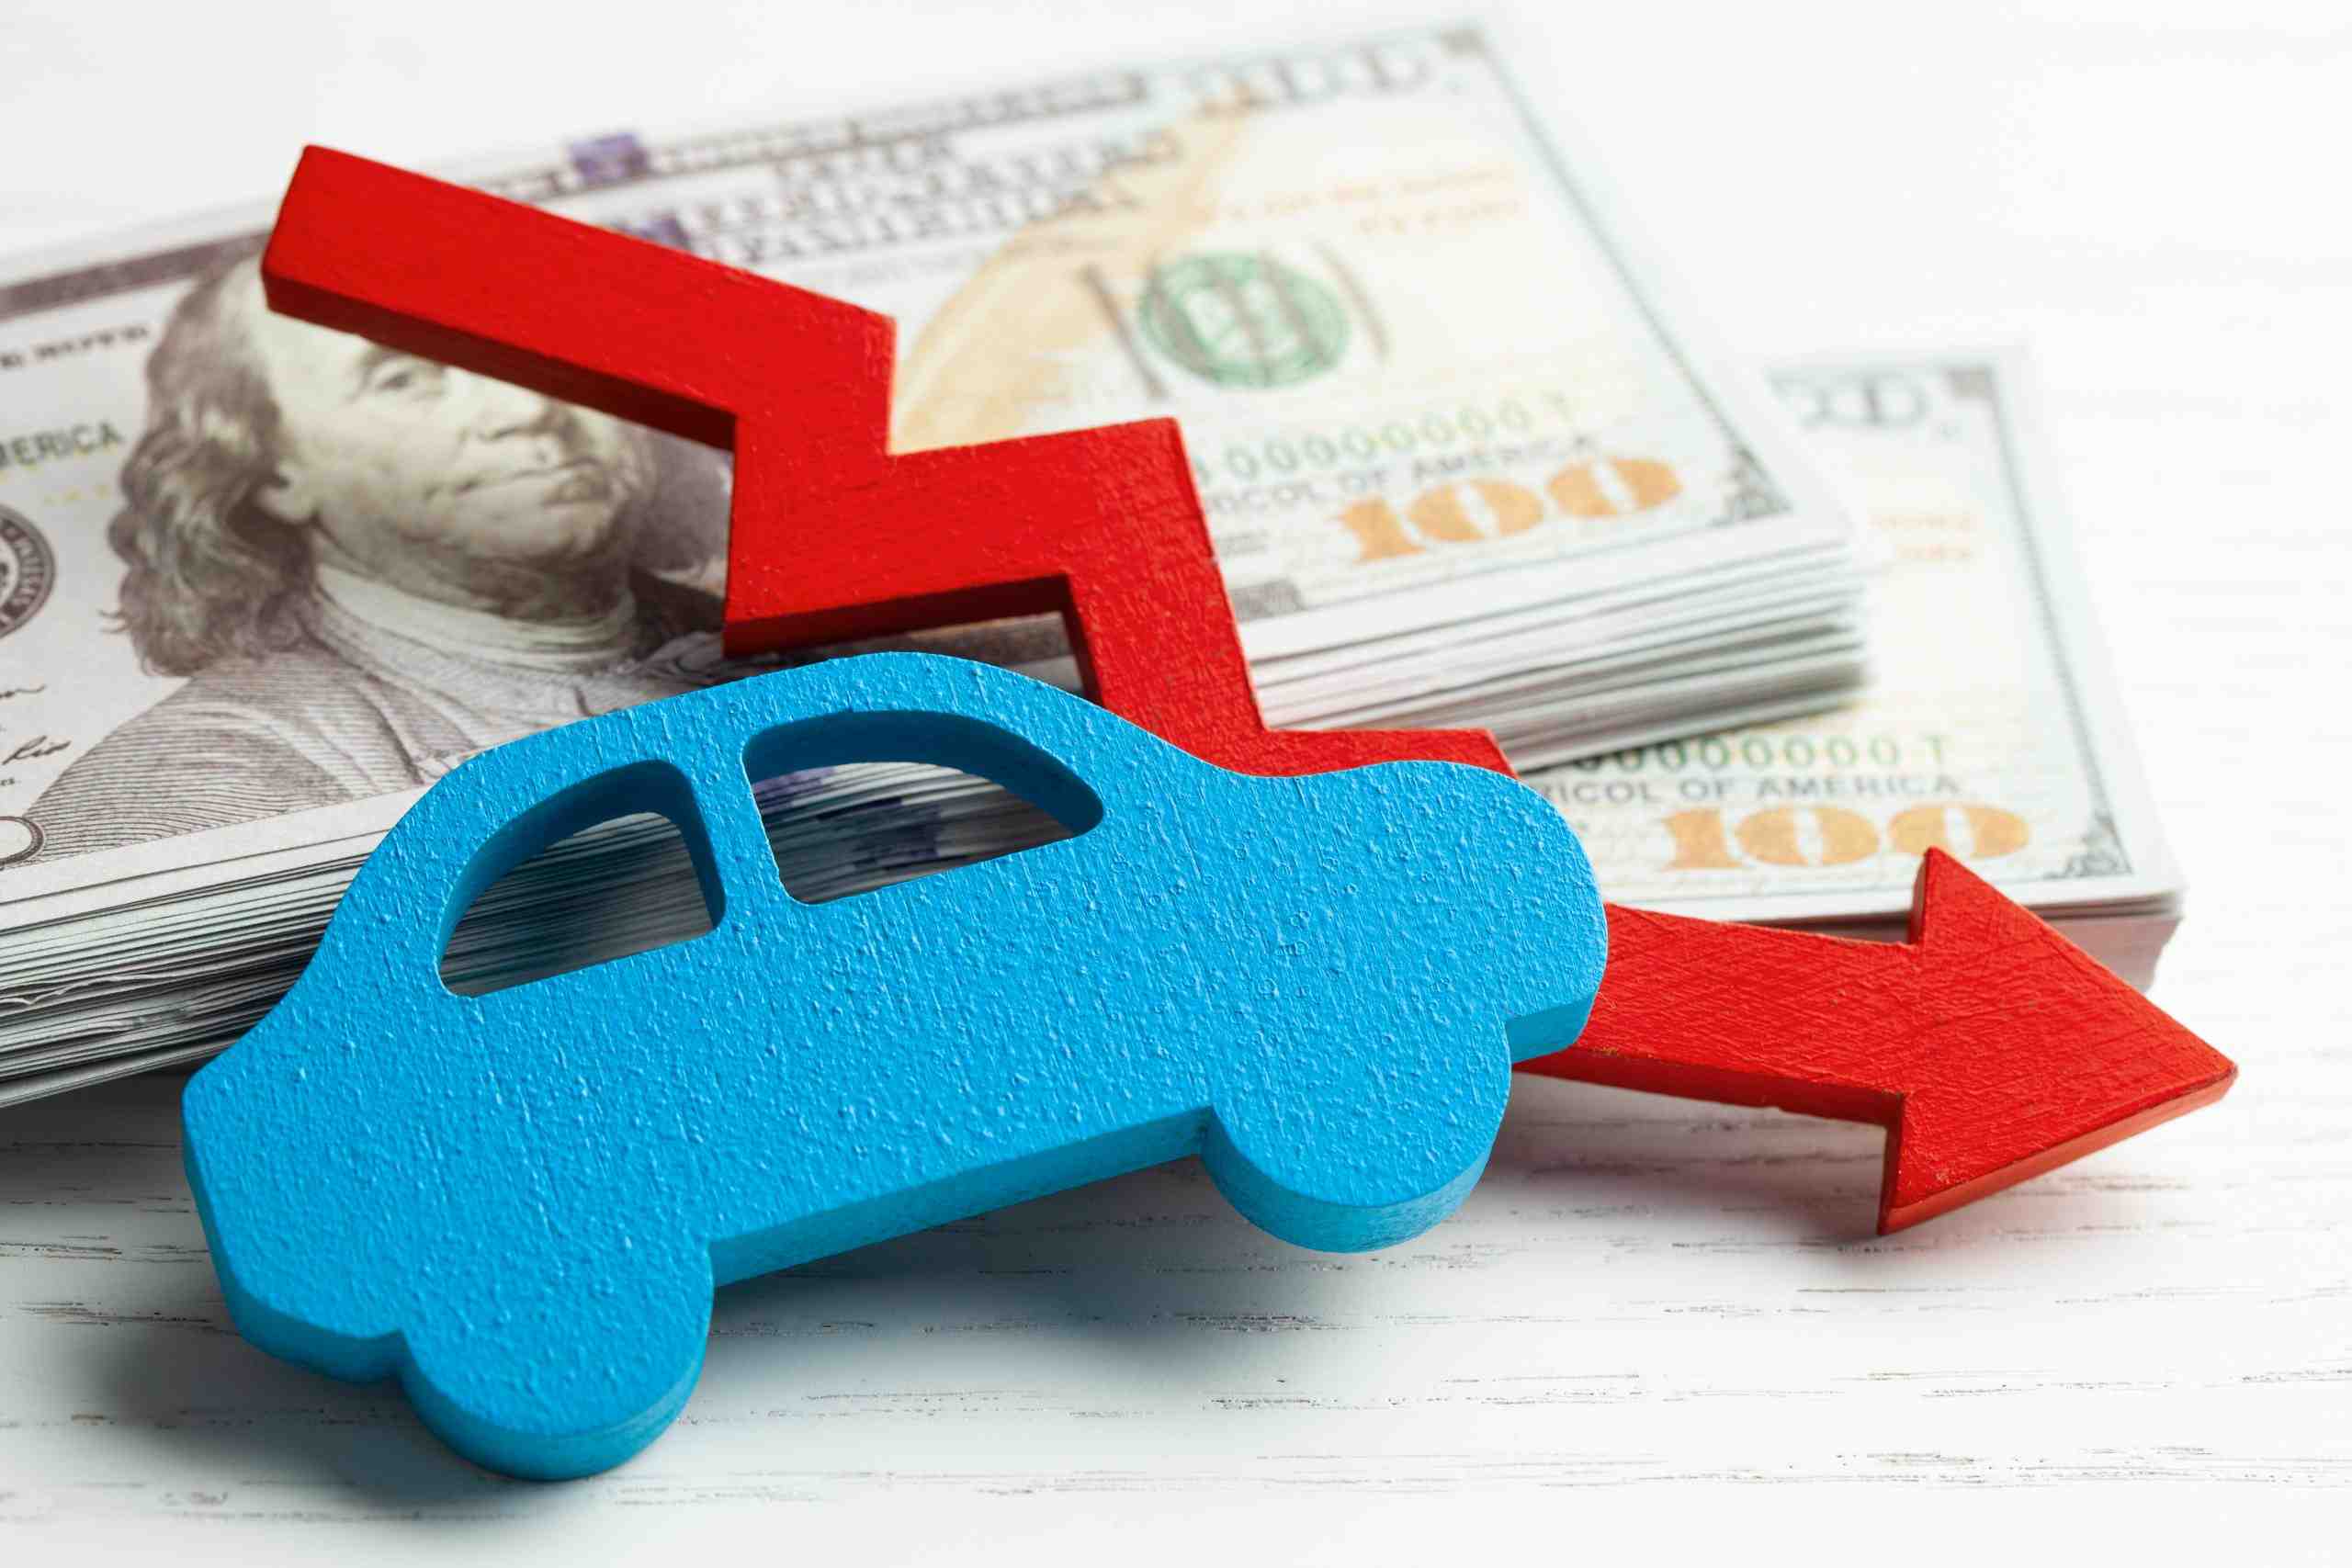 What is raising the prices of car insurance?